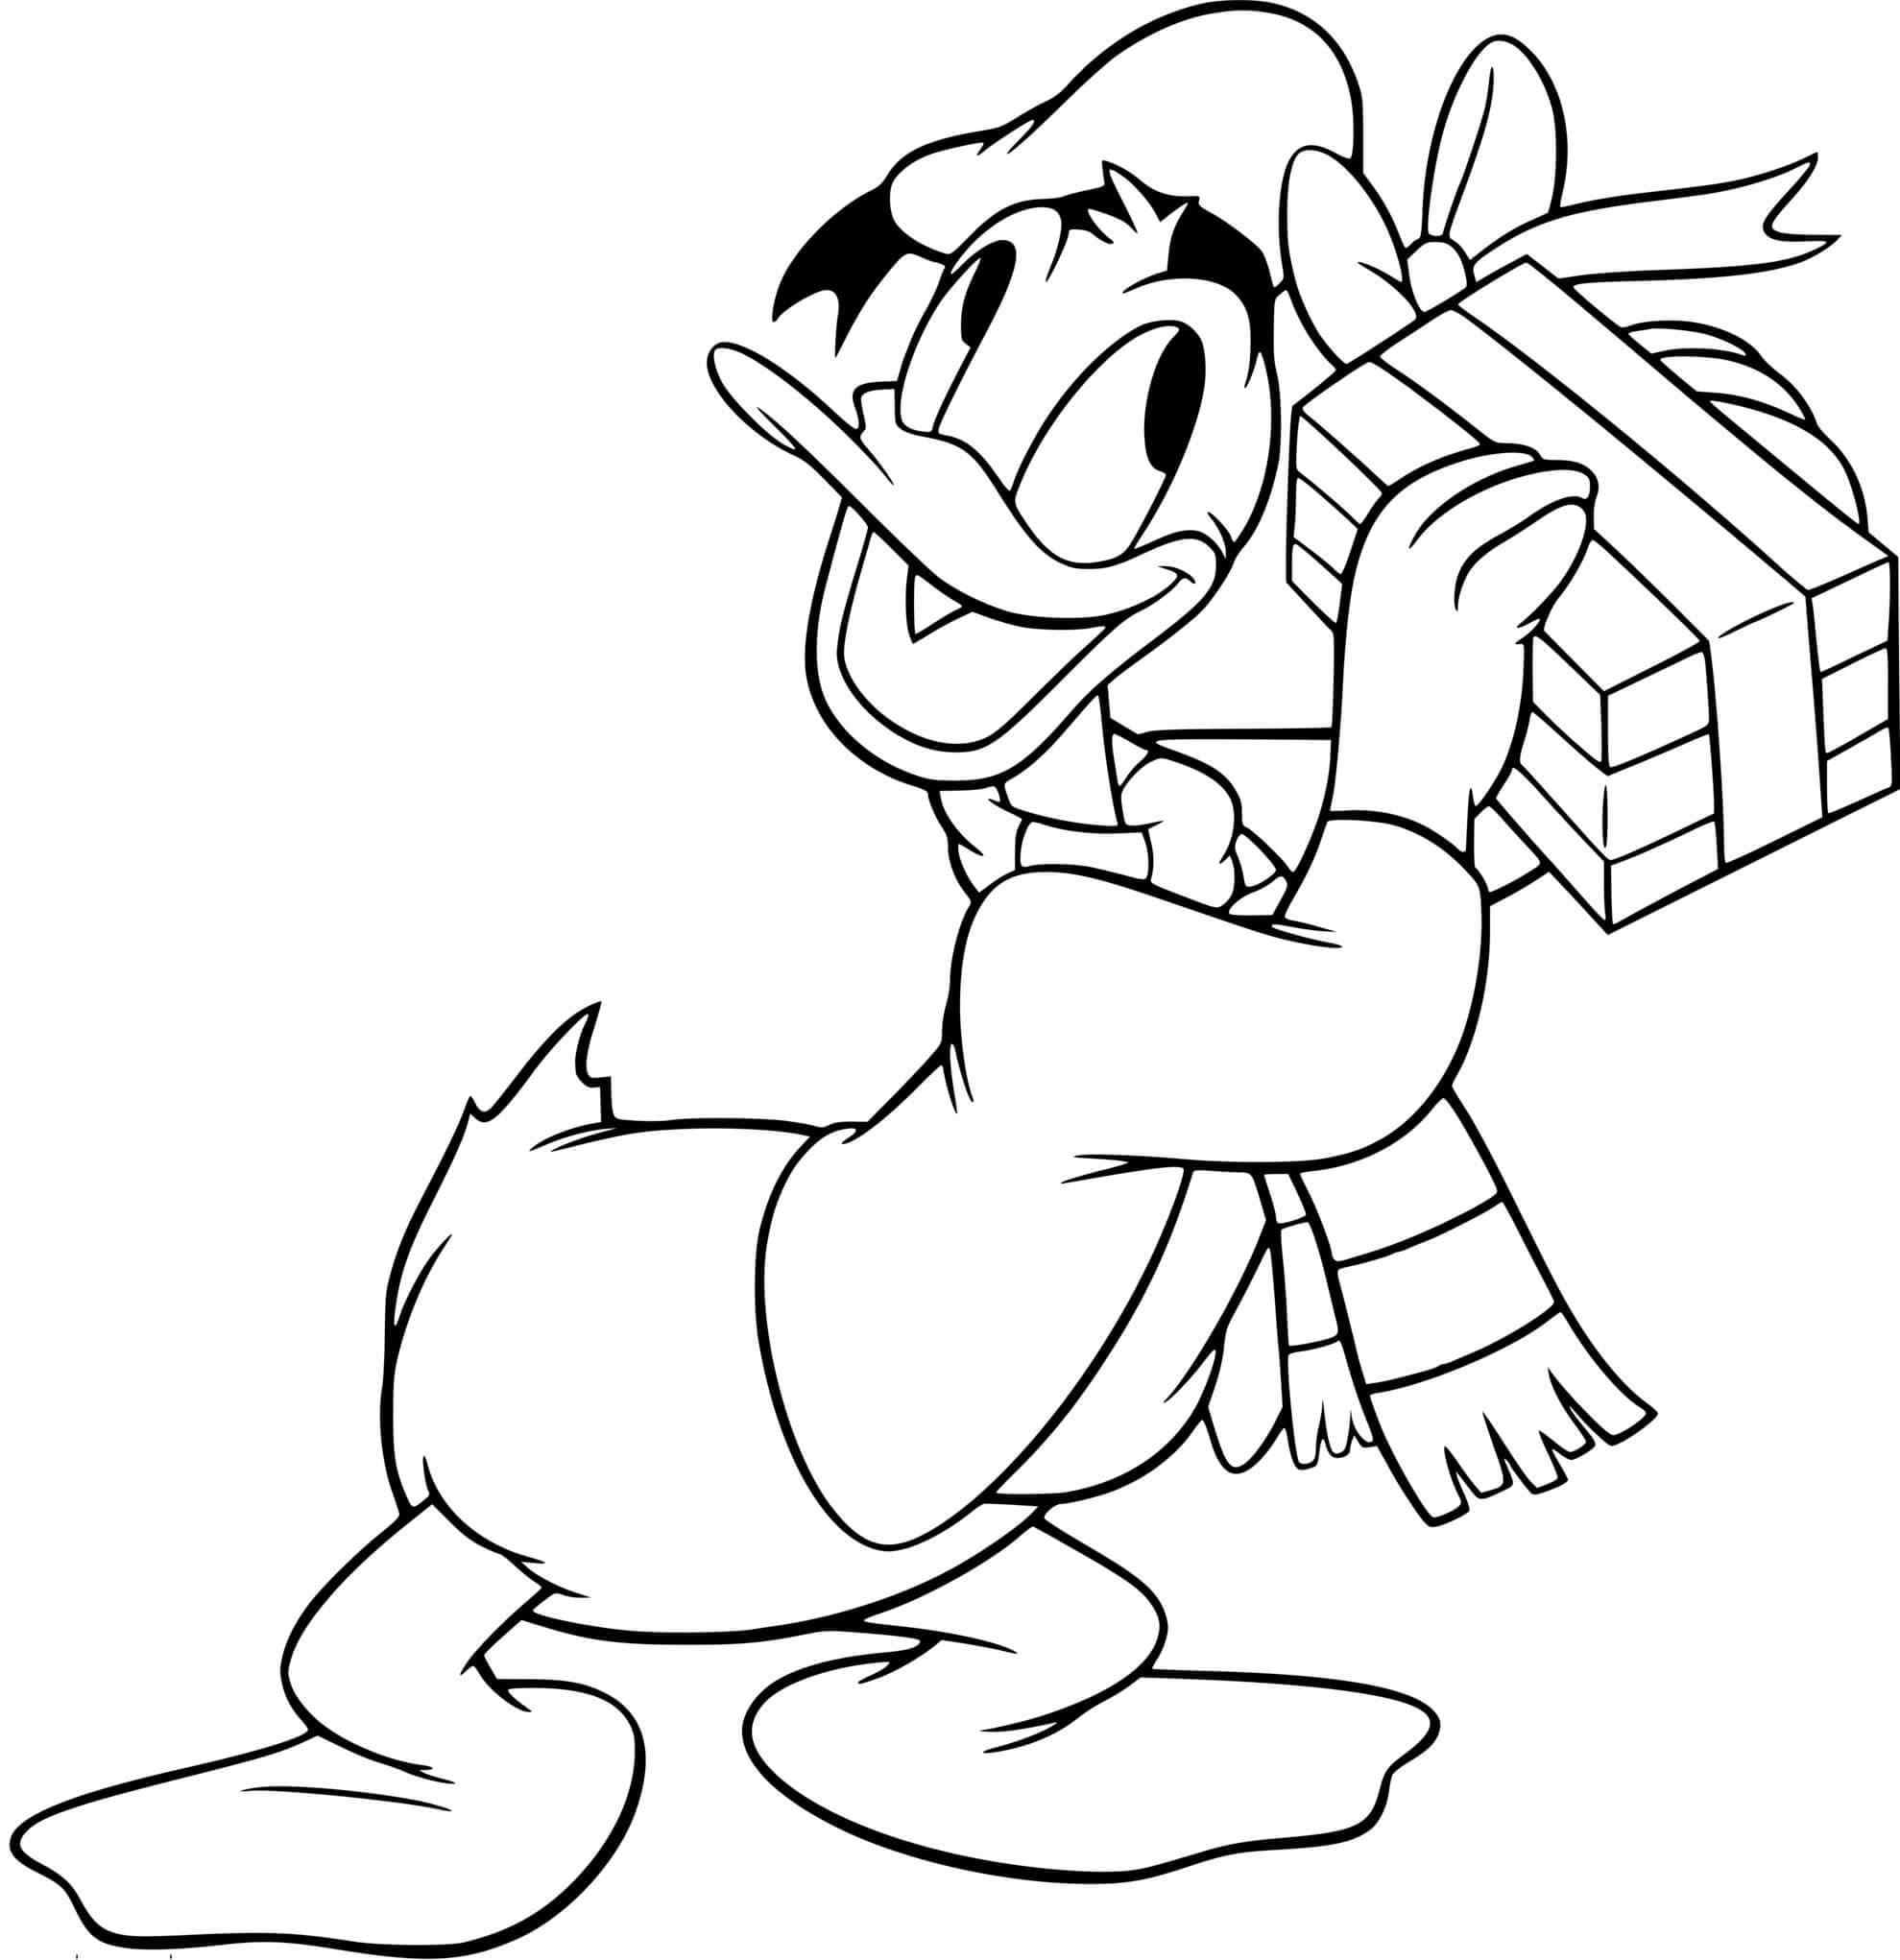 What Kind Of Gift Is This Christmas Coloring Page